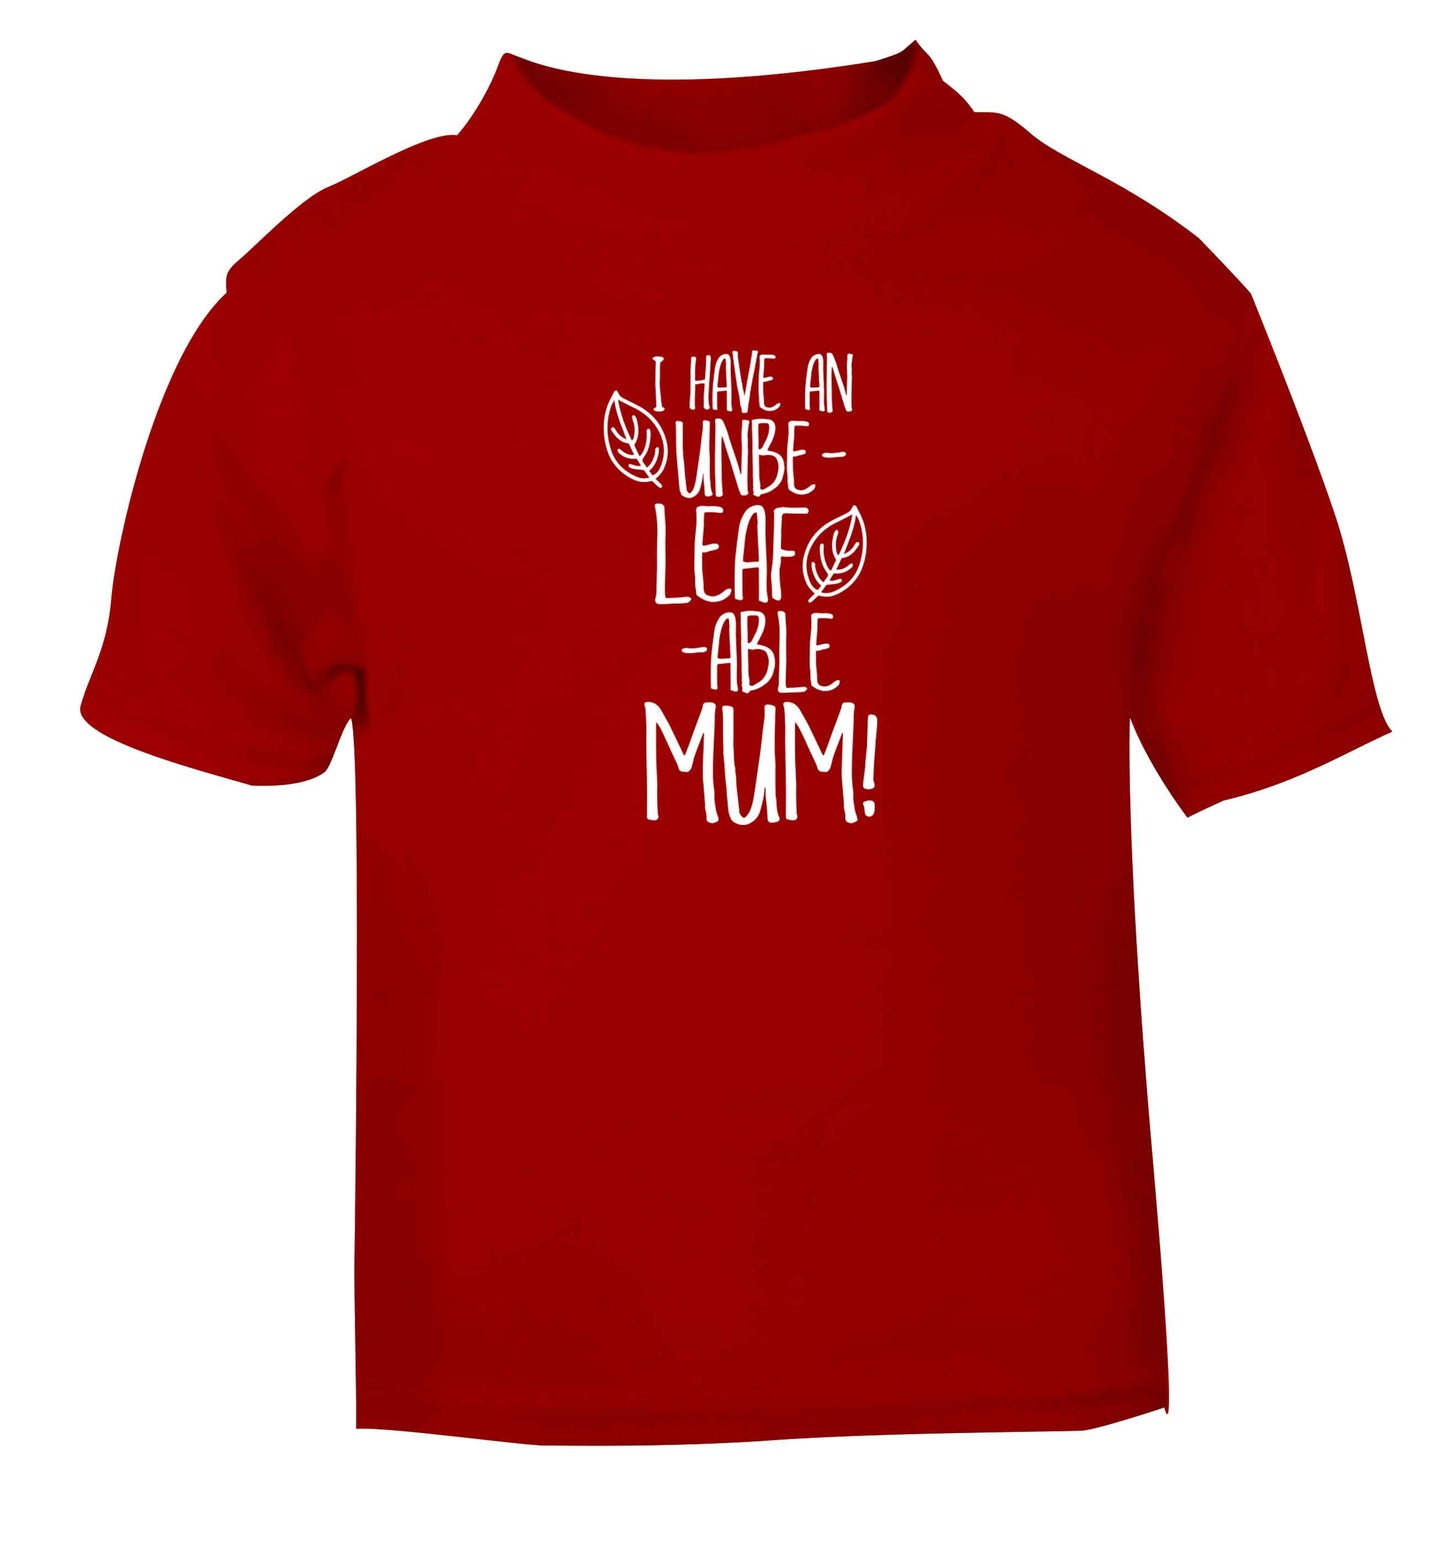 I have an unbeleafable mum! red baby toddler Tshirt 2 Years